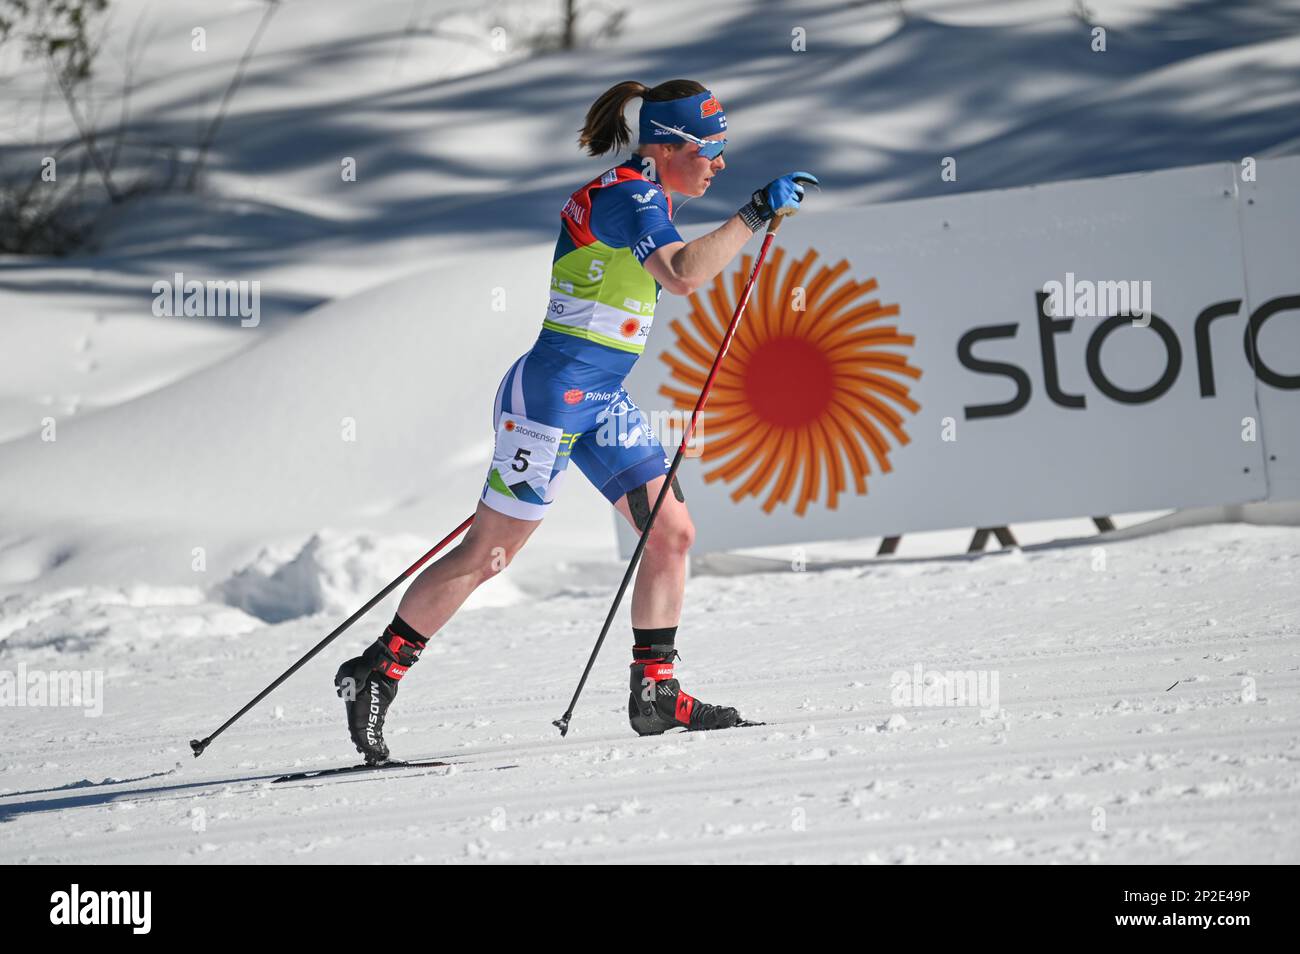 Planica, Slovenia. 4 March, 2023. It was so warm for the women’s 30-kilometer classic race at the 2023 FIS World Nordic Ski Championships in Planica, Slovenia, 4 March, 2023, that Finland's Krista Parmakoski  opted to wear shorts. Credit: John Lazenby/Alamy Live News Stock Photo